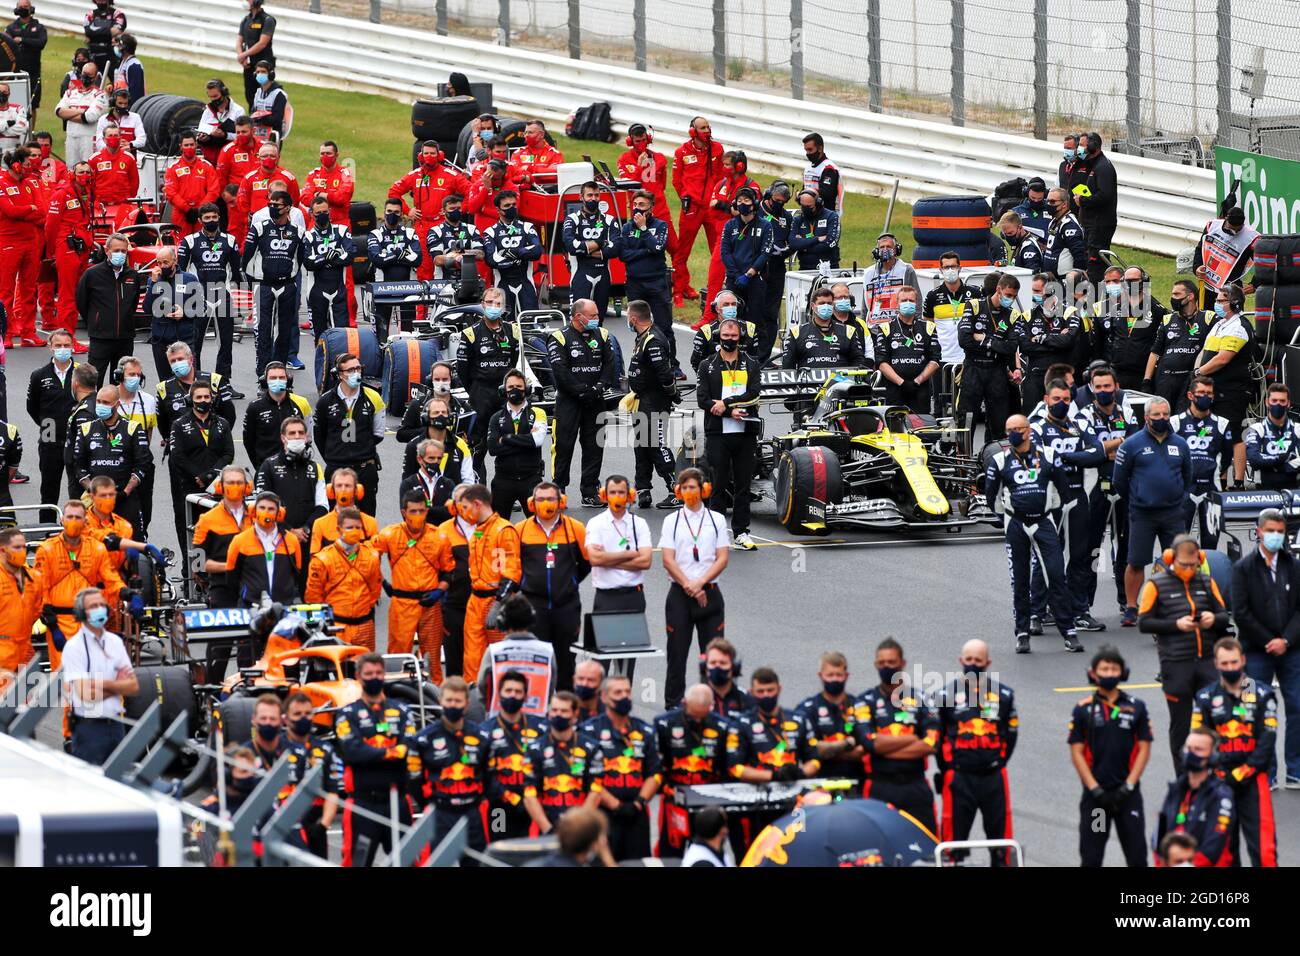 Renault F1 Team as the grid observes the national anthem. Portuguese Grand Prix, Sunday 25th October 2020. Portimao, Portugal. Stock Photo